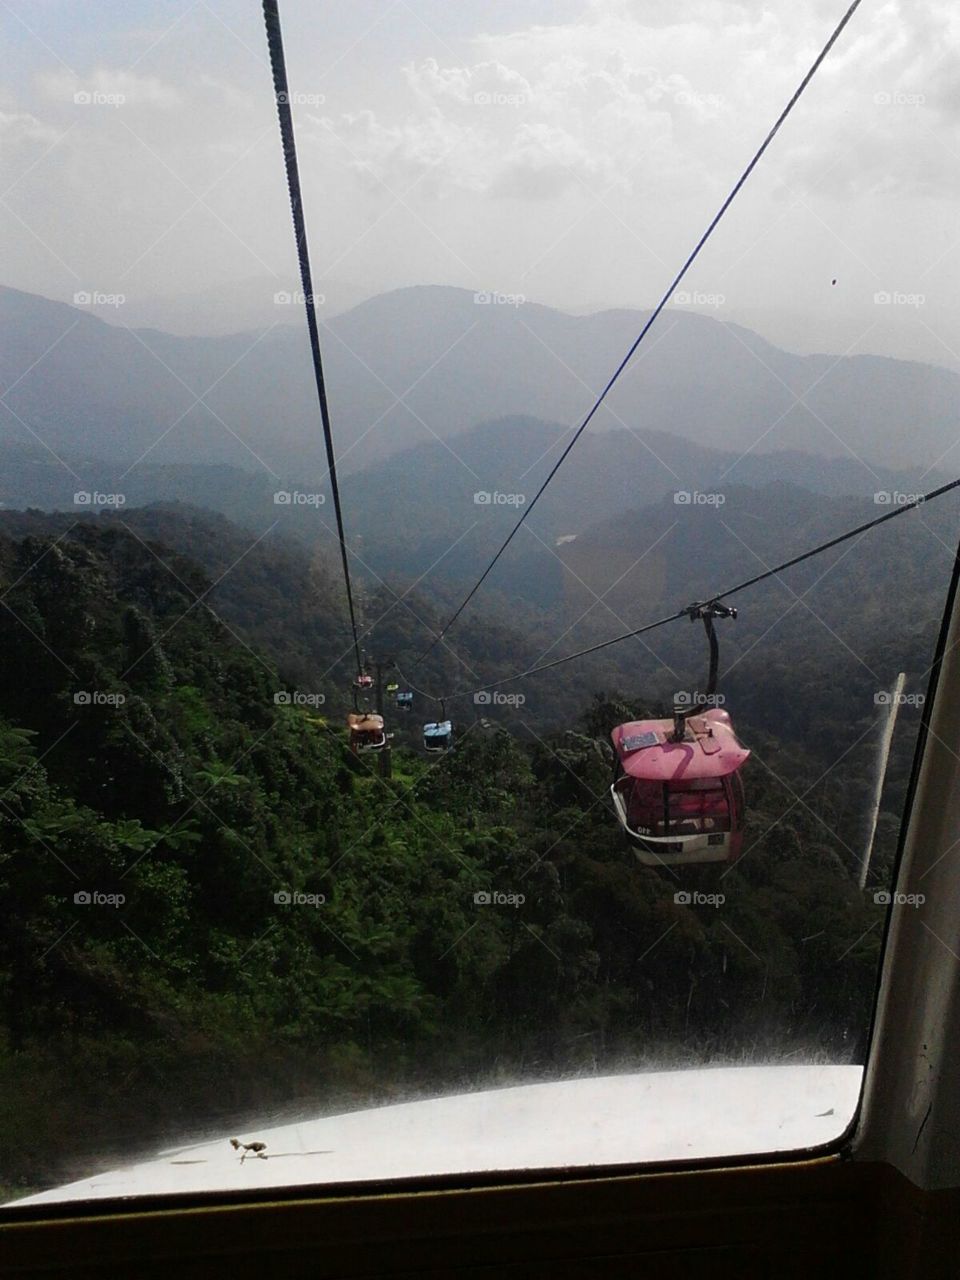 miss from cable car